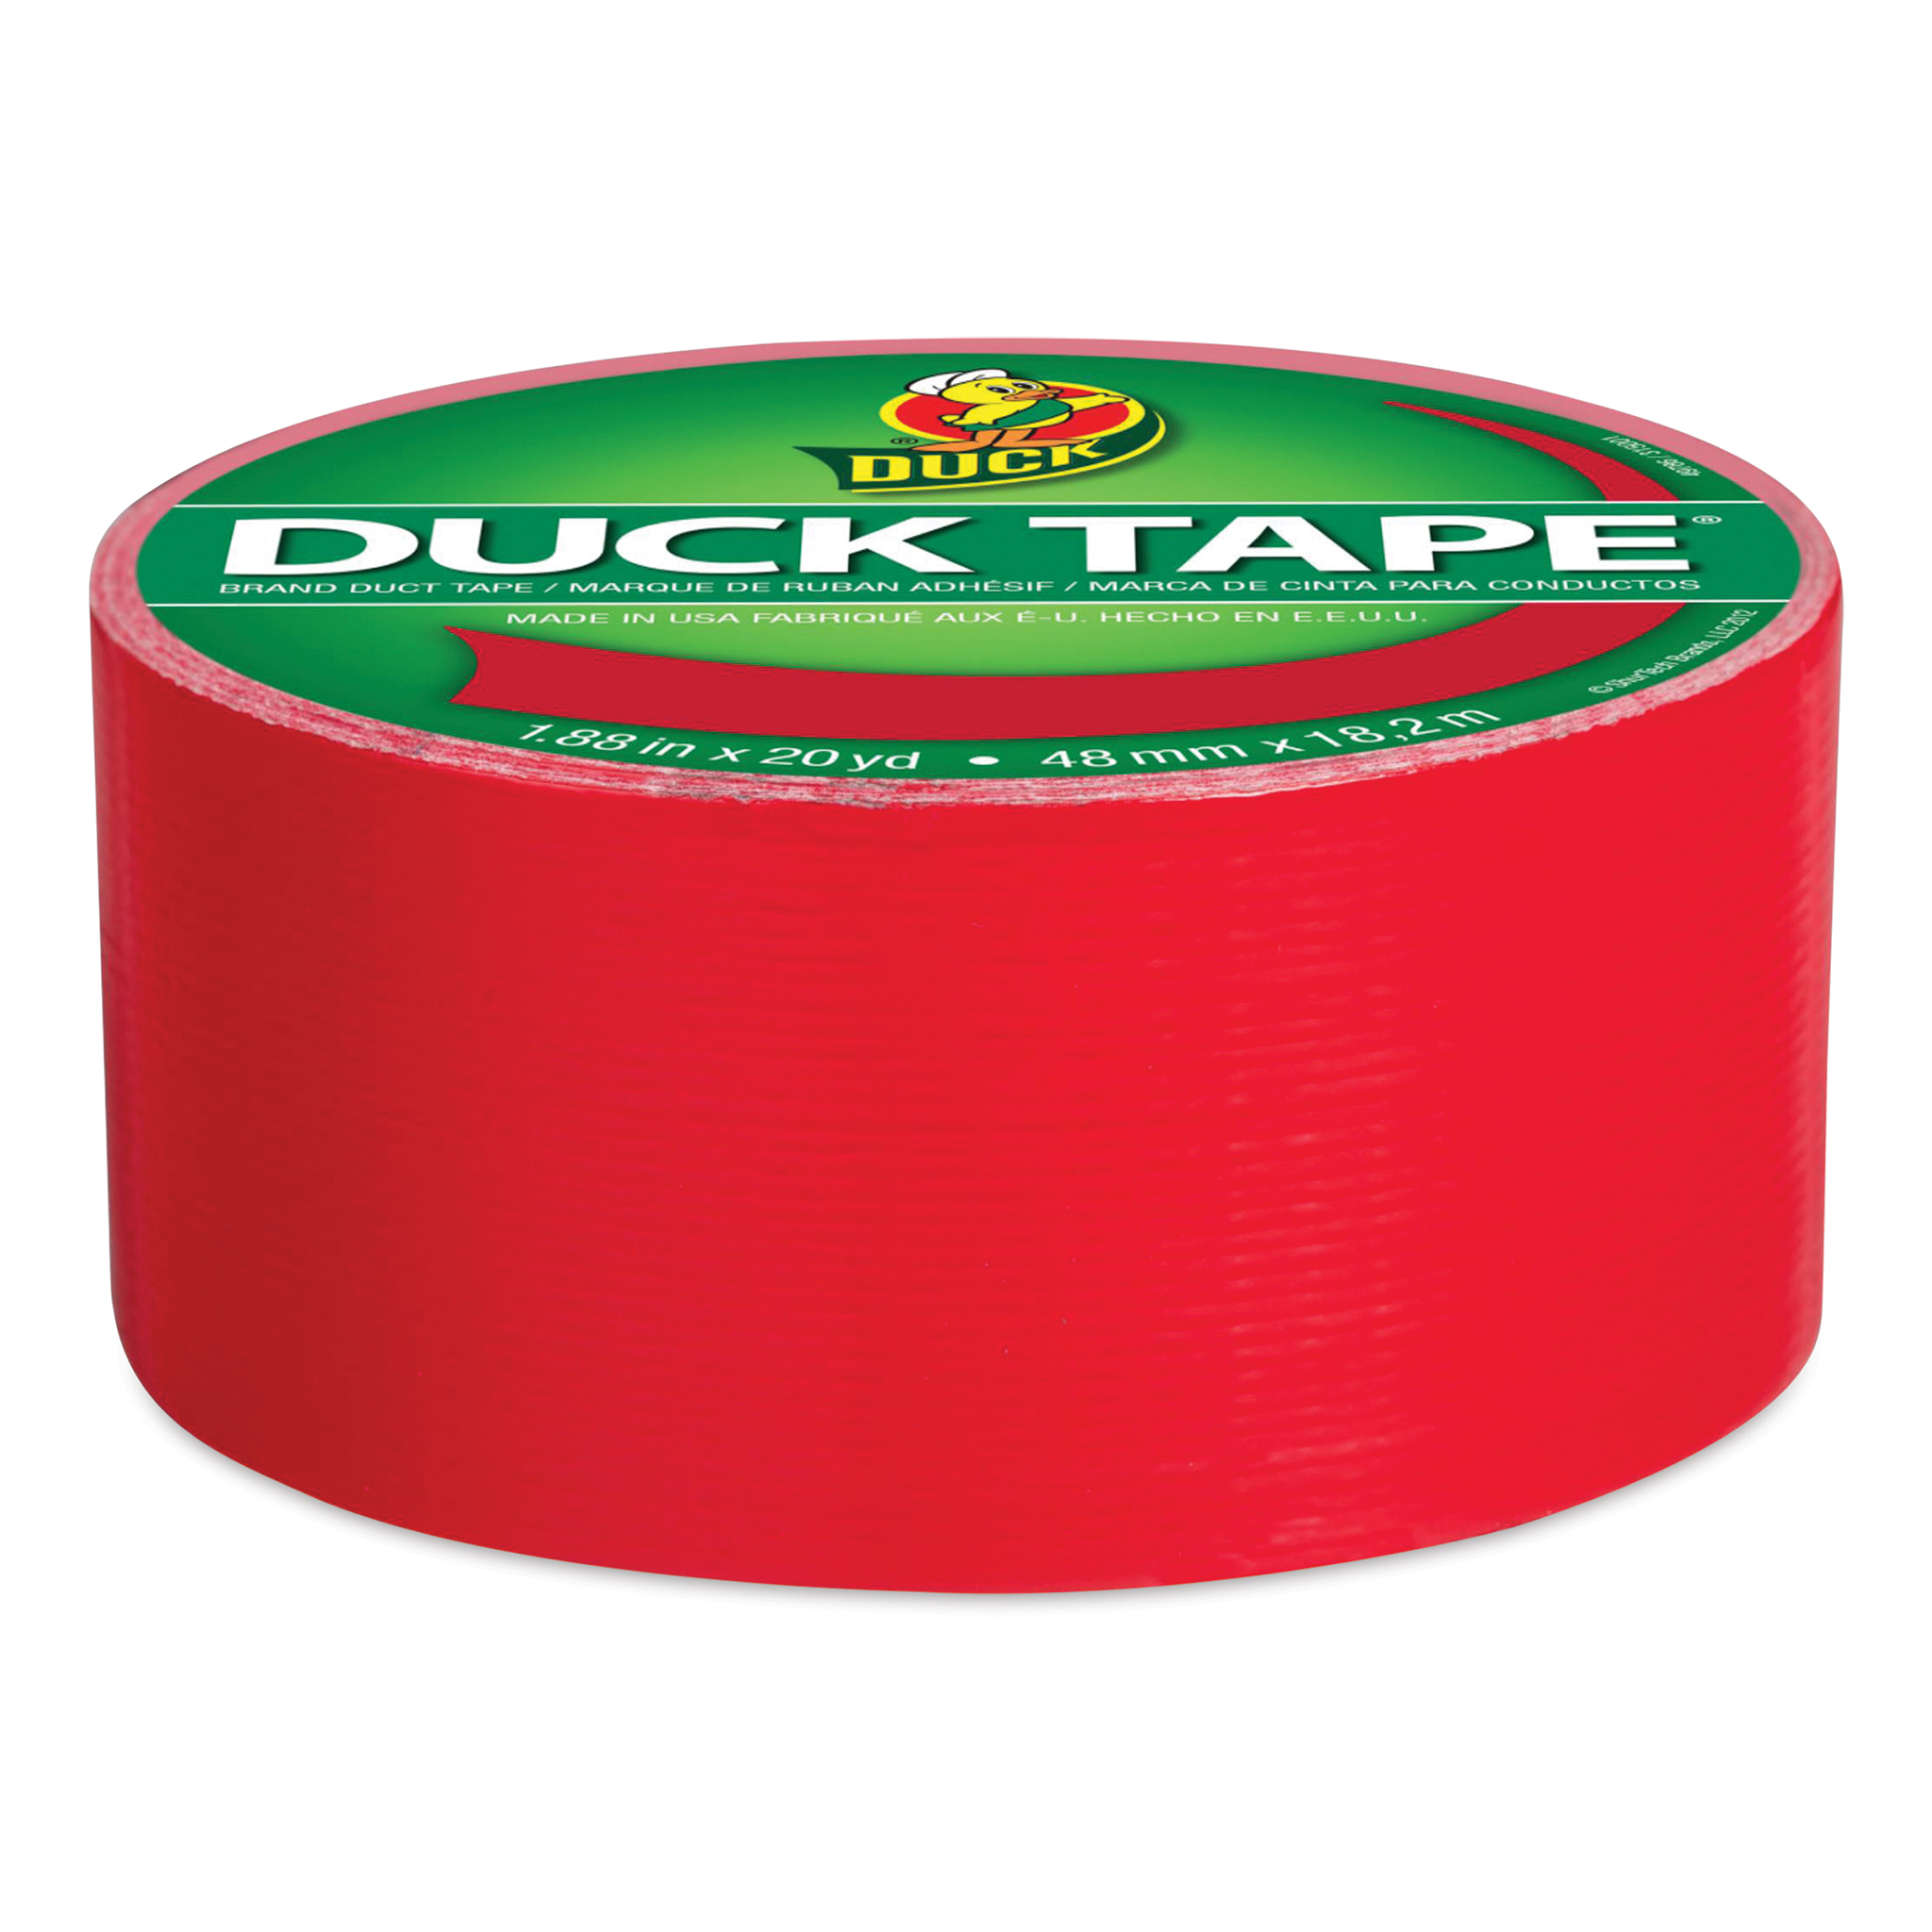 ShurTech Color Duck Tape - 1.88 x 20 yds, Red